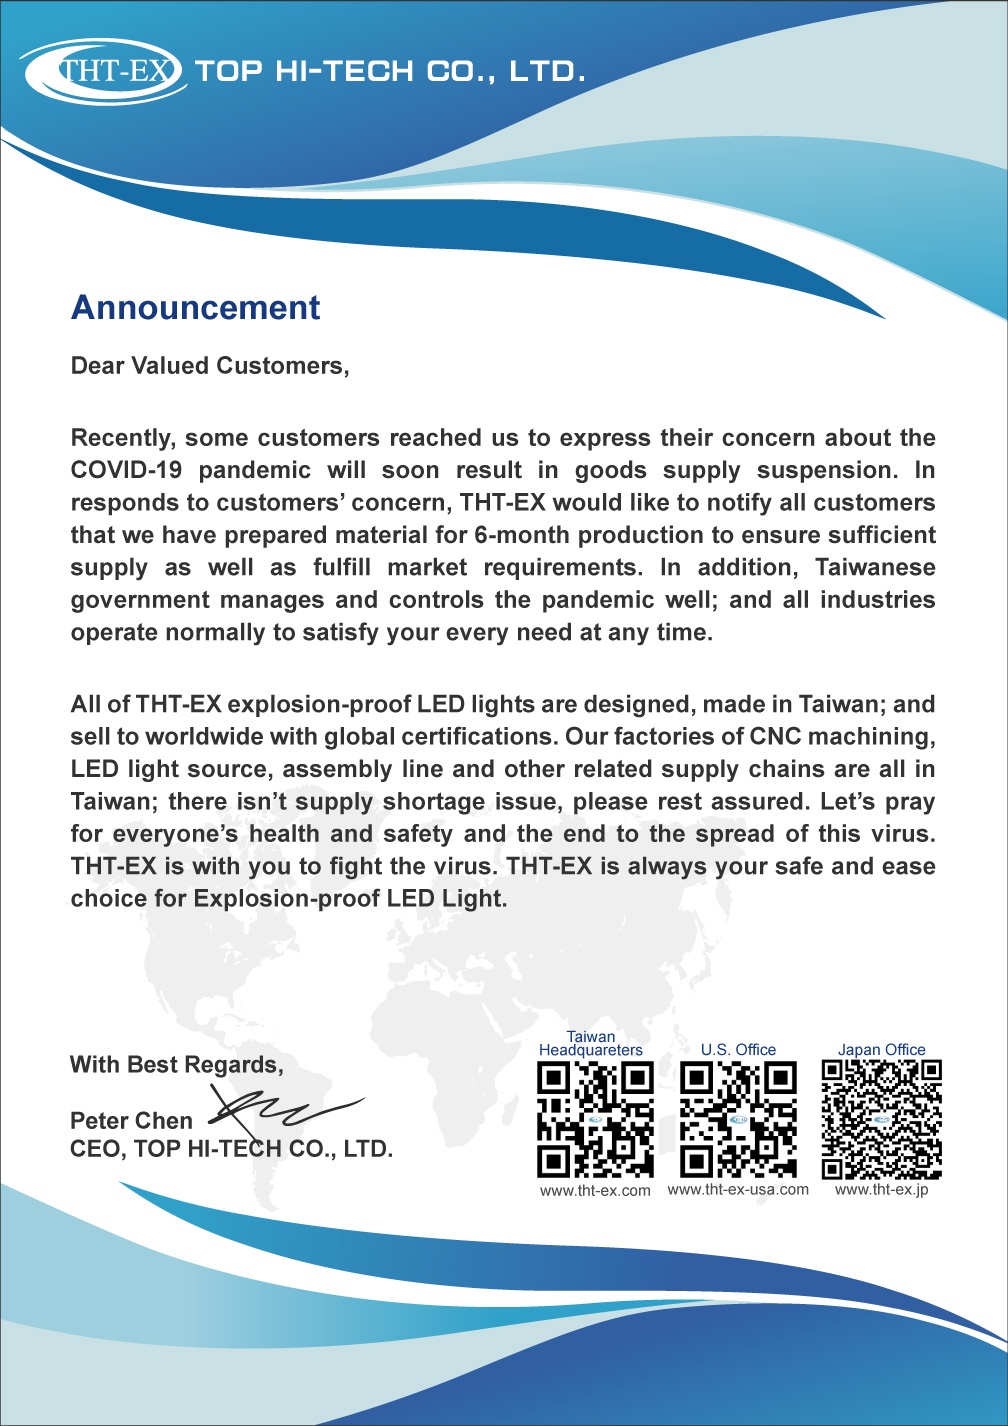 THT-EX Announcement Letter for Our Customers and Business Partners.